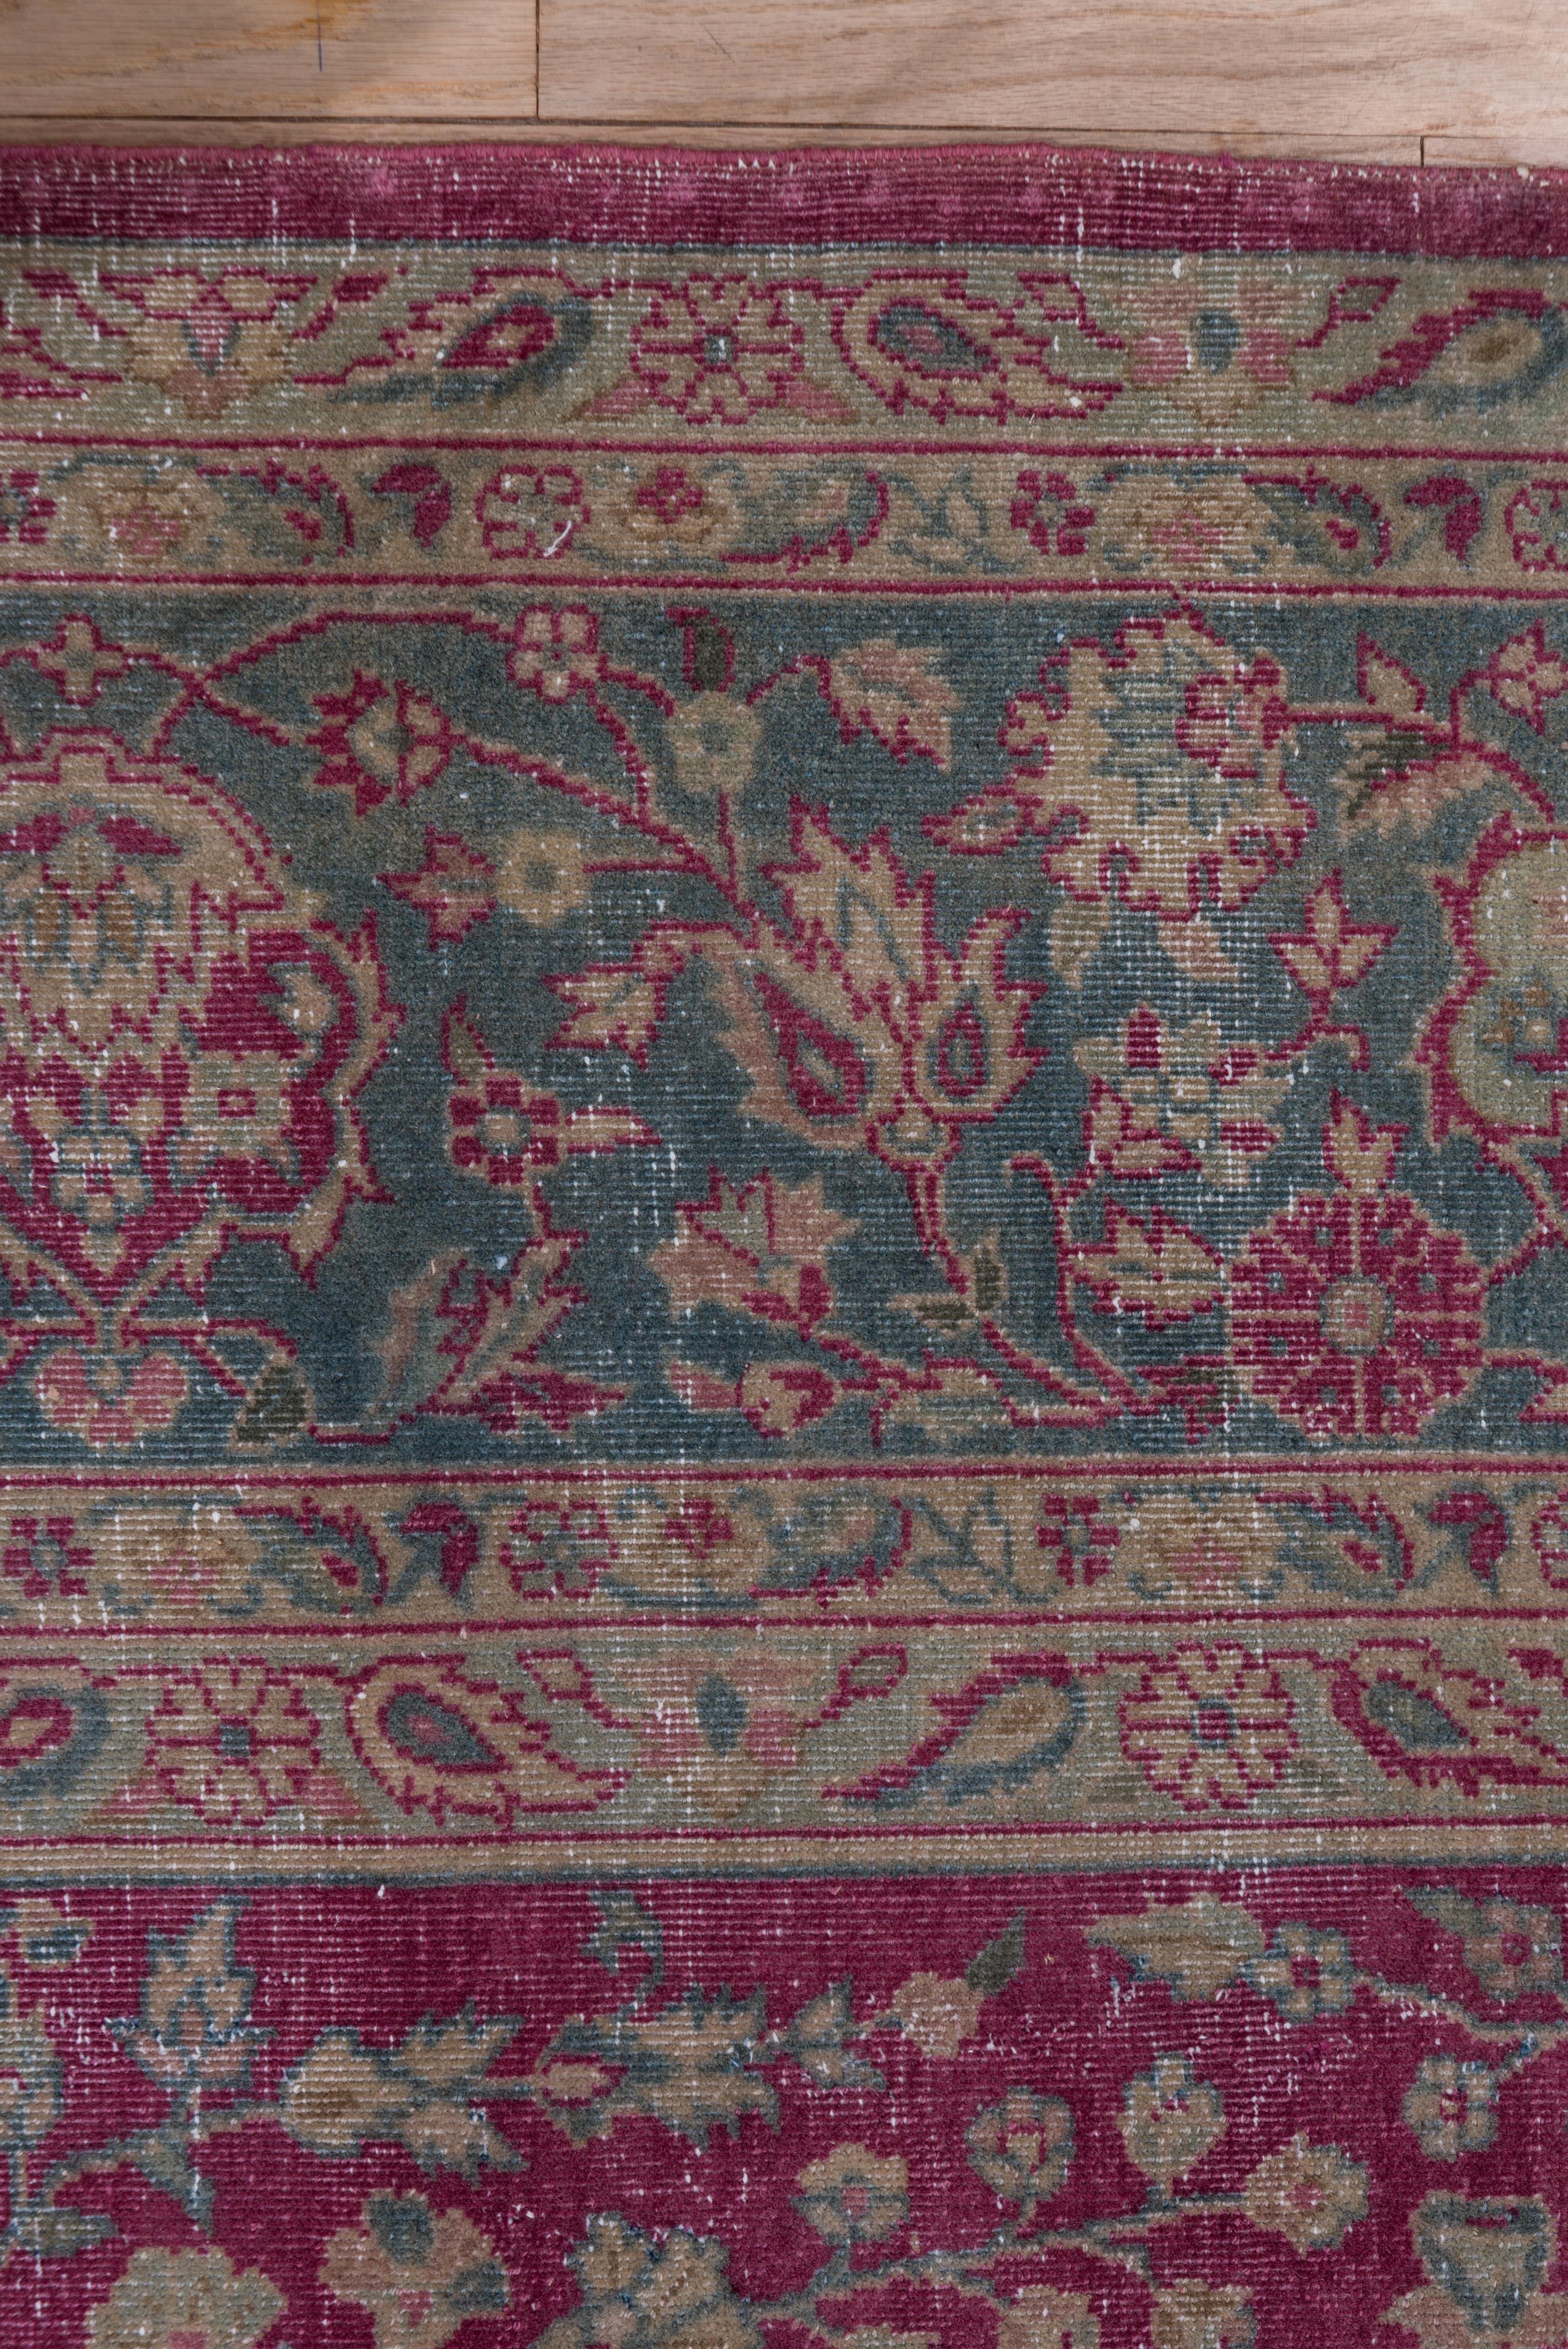 Antique Turkish Sivas Rug, Raspberry Red Field, Teal Borders, Circa 1930s For Sale 2